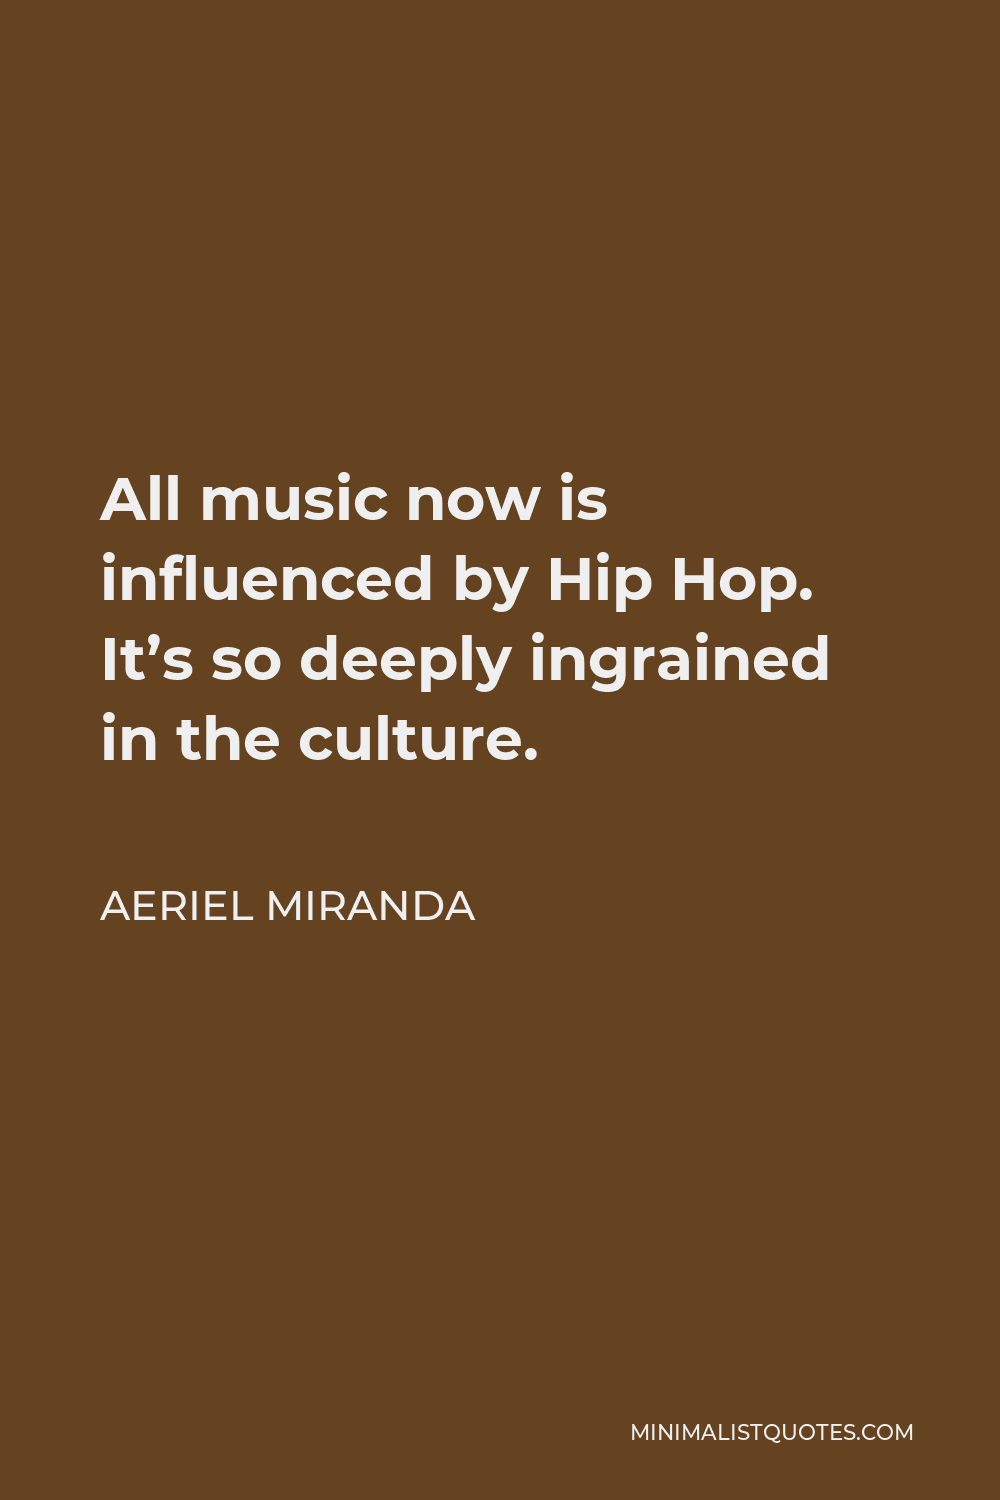 Aeriel Miranda Quote - All music now is influenced by Hip Hop. It’s so deeply ingrained in the culture.